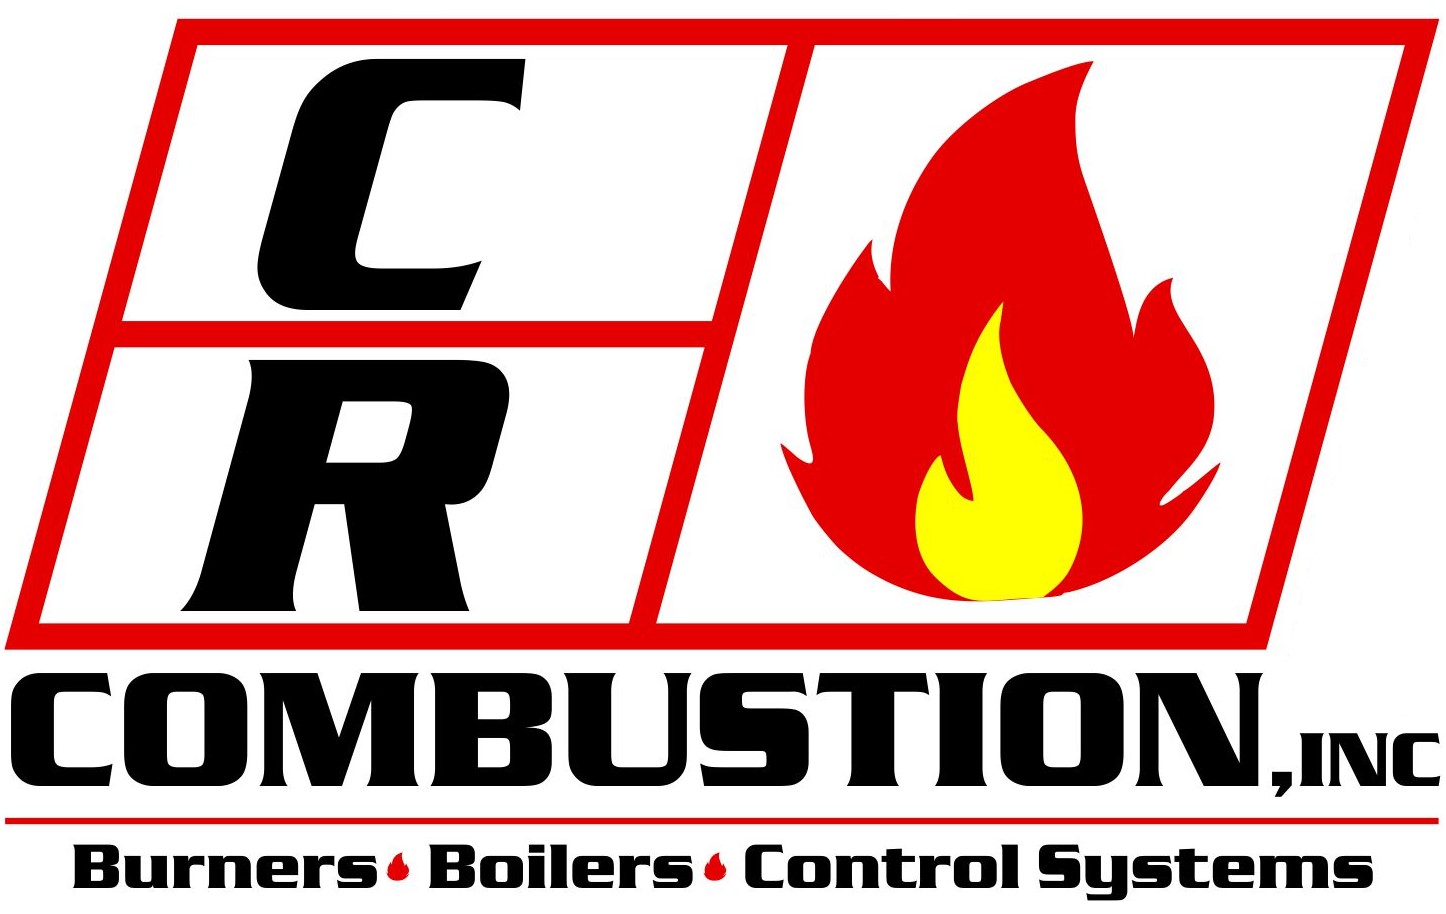 CR Combustion Inc